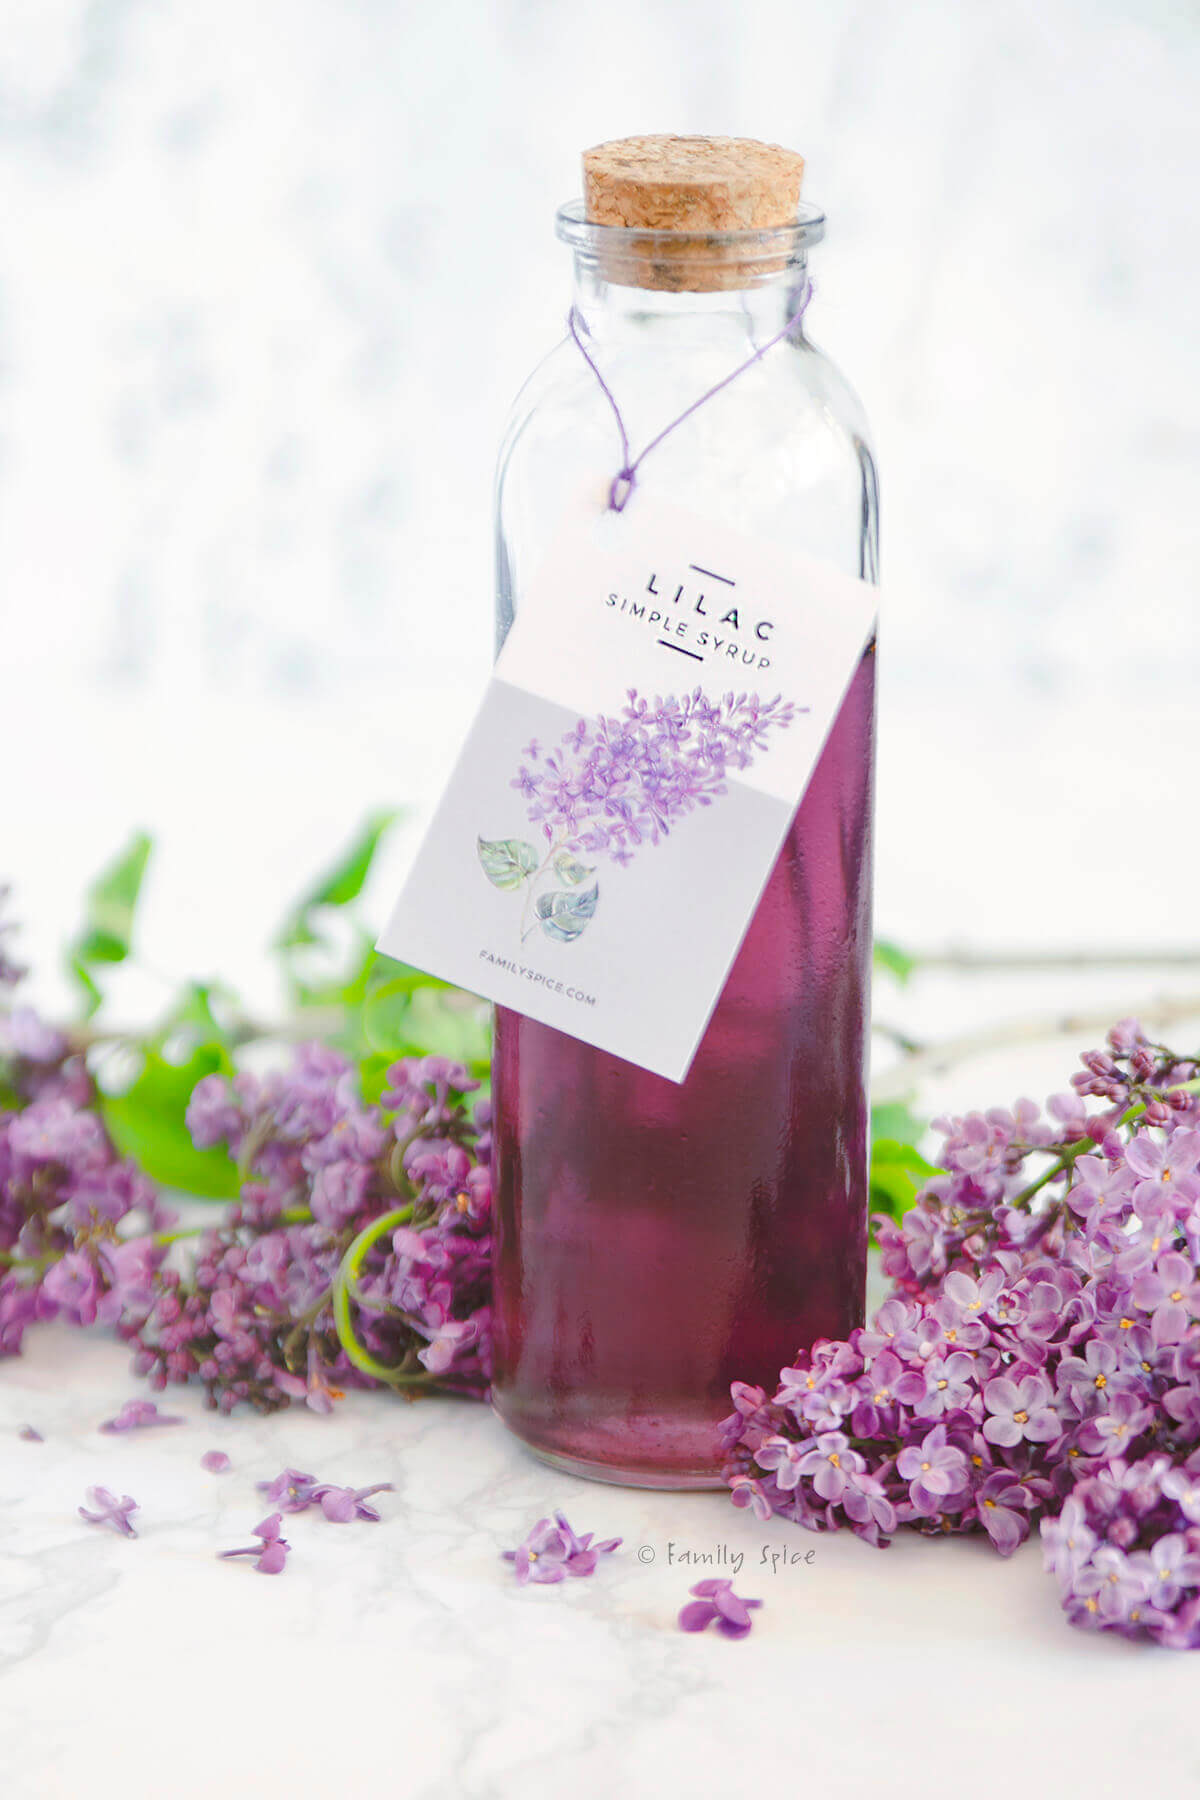 A bottle of lilac syrup with a homemade label on it and fresh lilacs around it